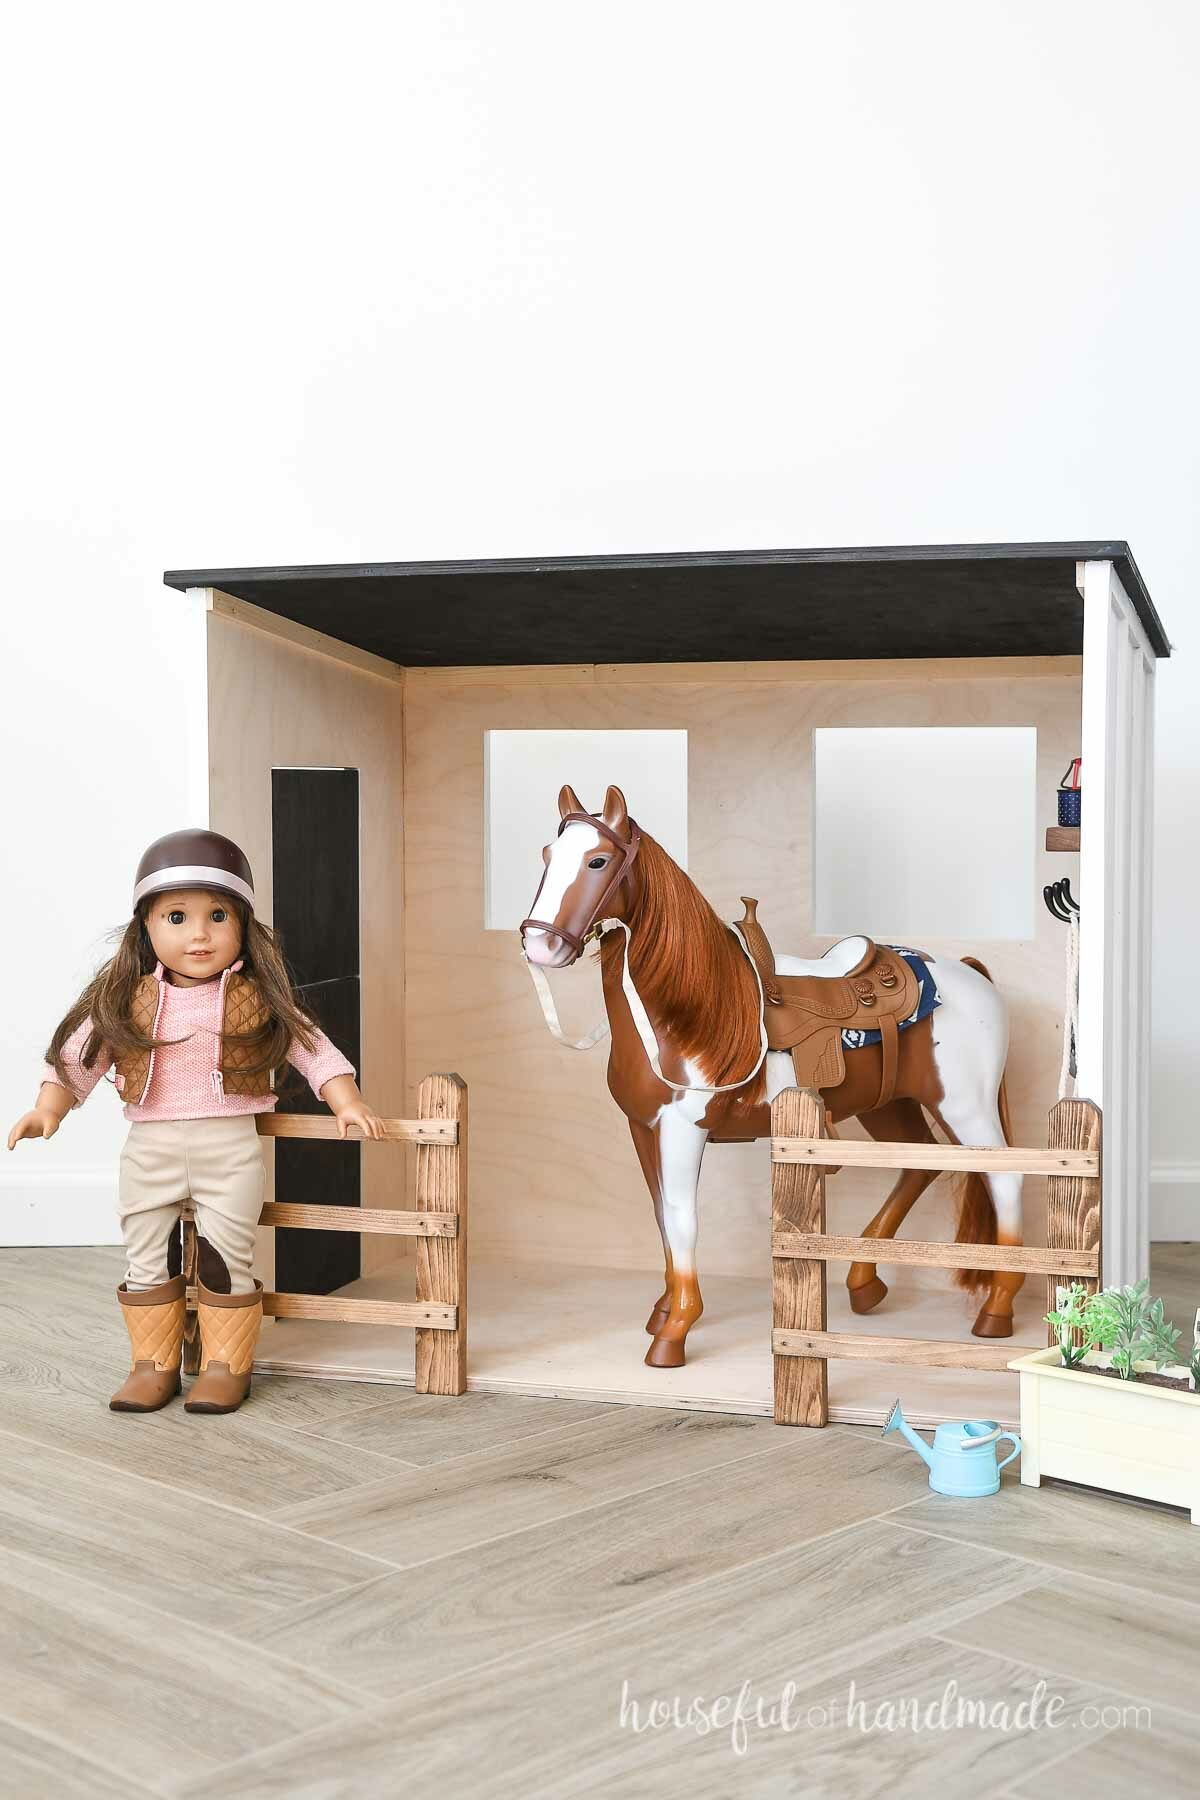 Inside of the DIY toy barn with fences on the sides and toy horse inside next to an American Girl doll. 